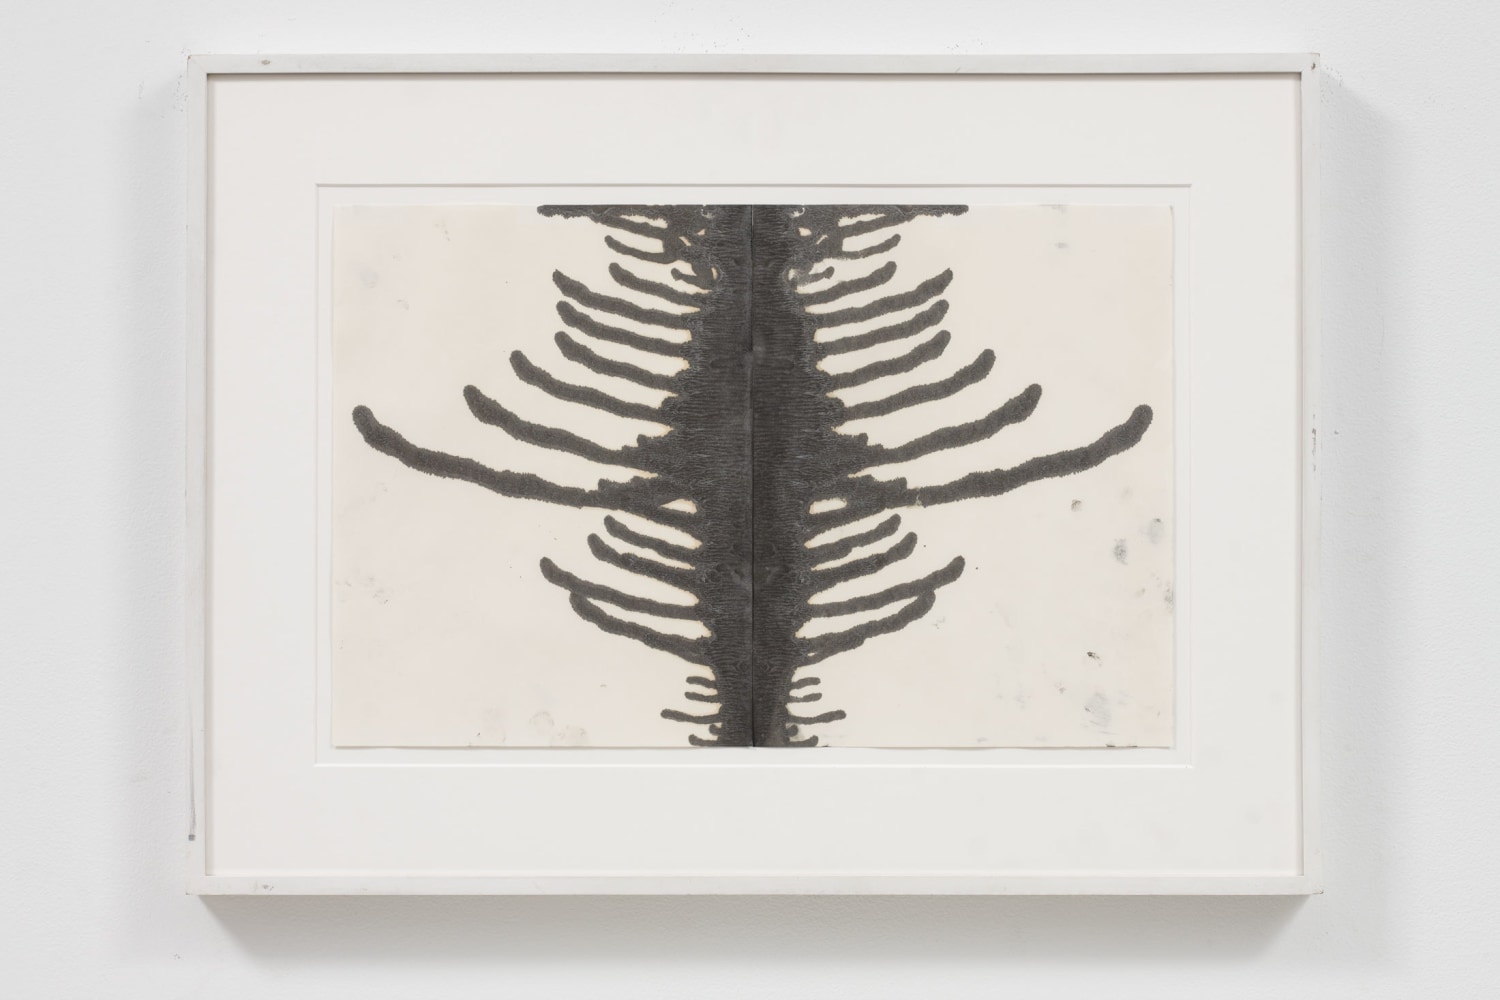 Christopher Wool
Untitled, 1986
Enamel on paper
11 x 17 inches (27.9 x 43.2 cm)
Framed: 17 3/4 x 23 3/4 inches (45.1 x 60.3 cm)